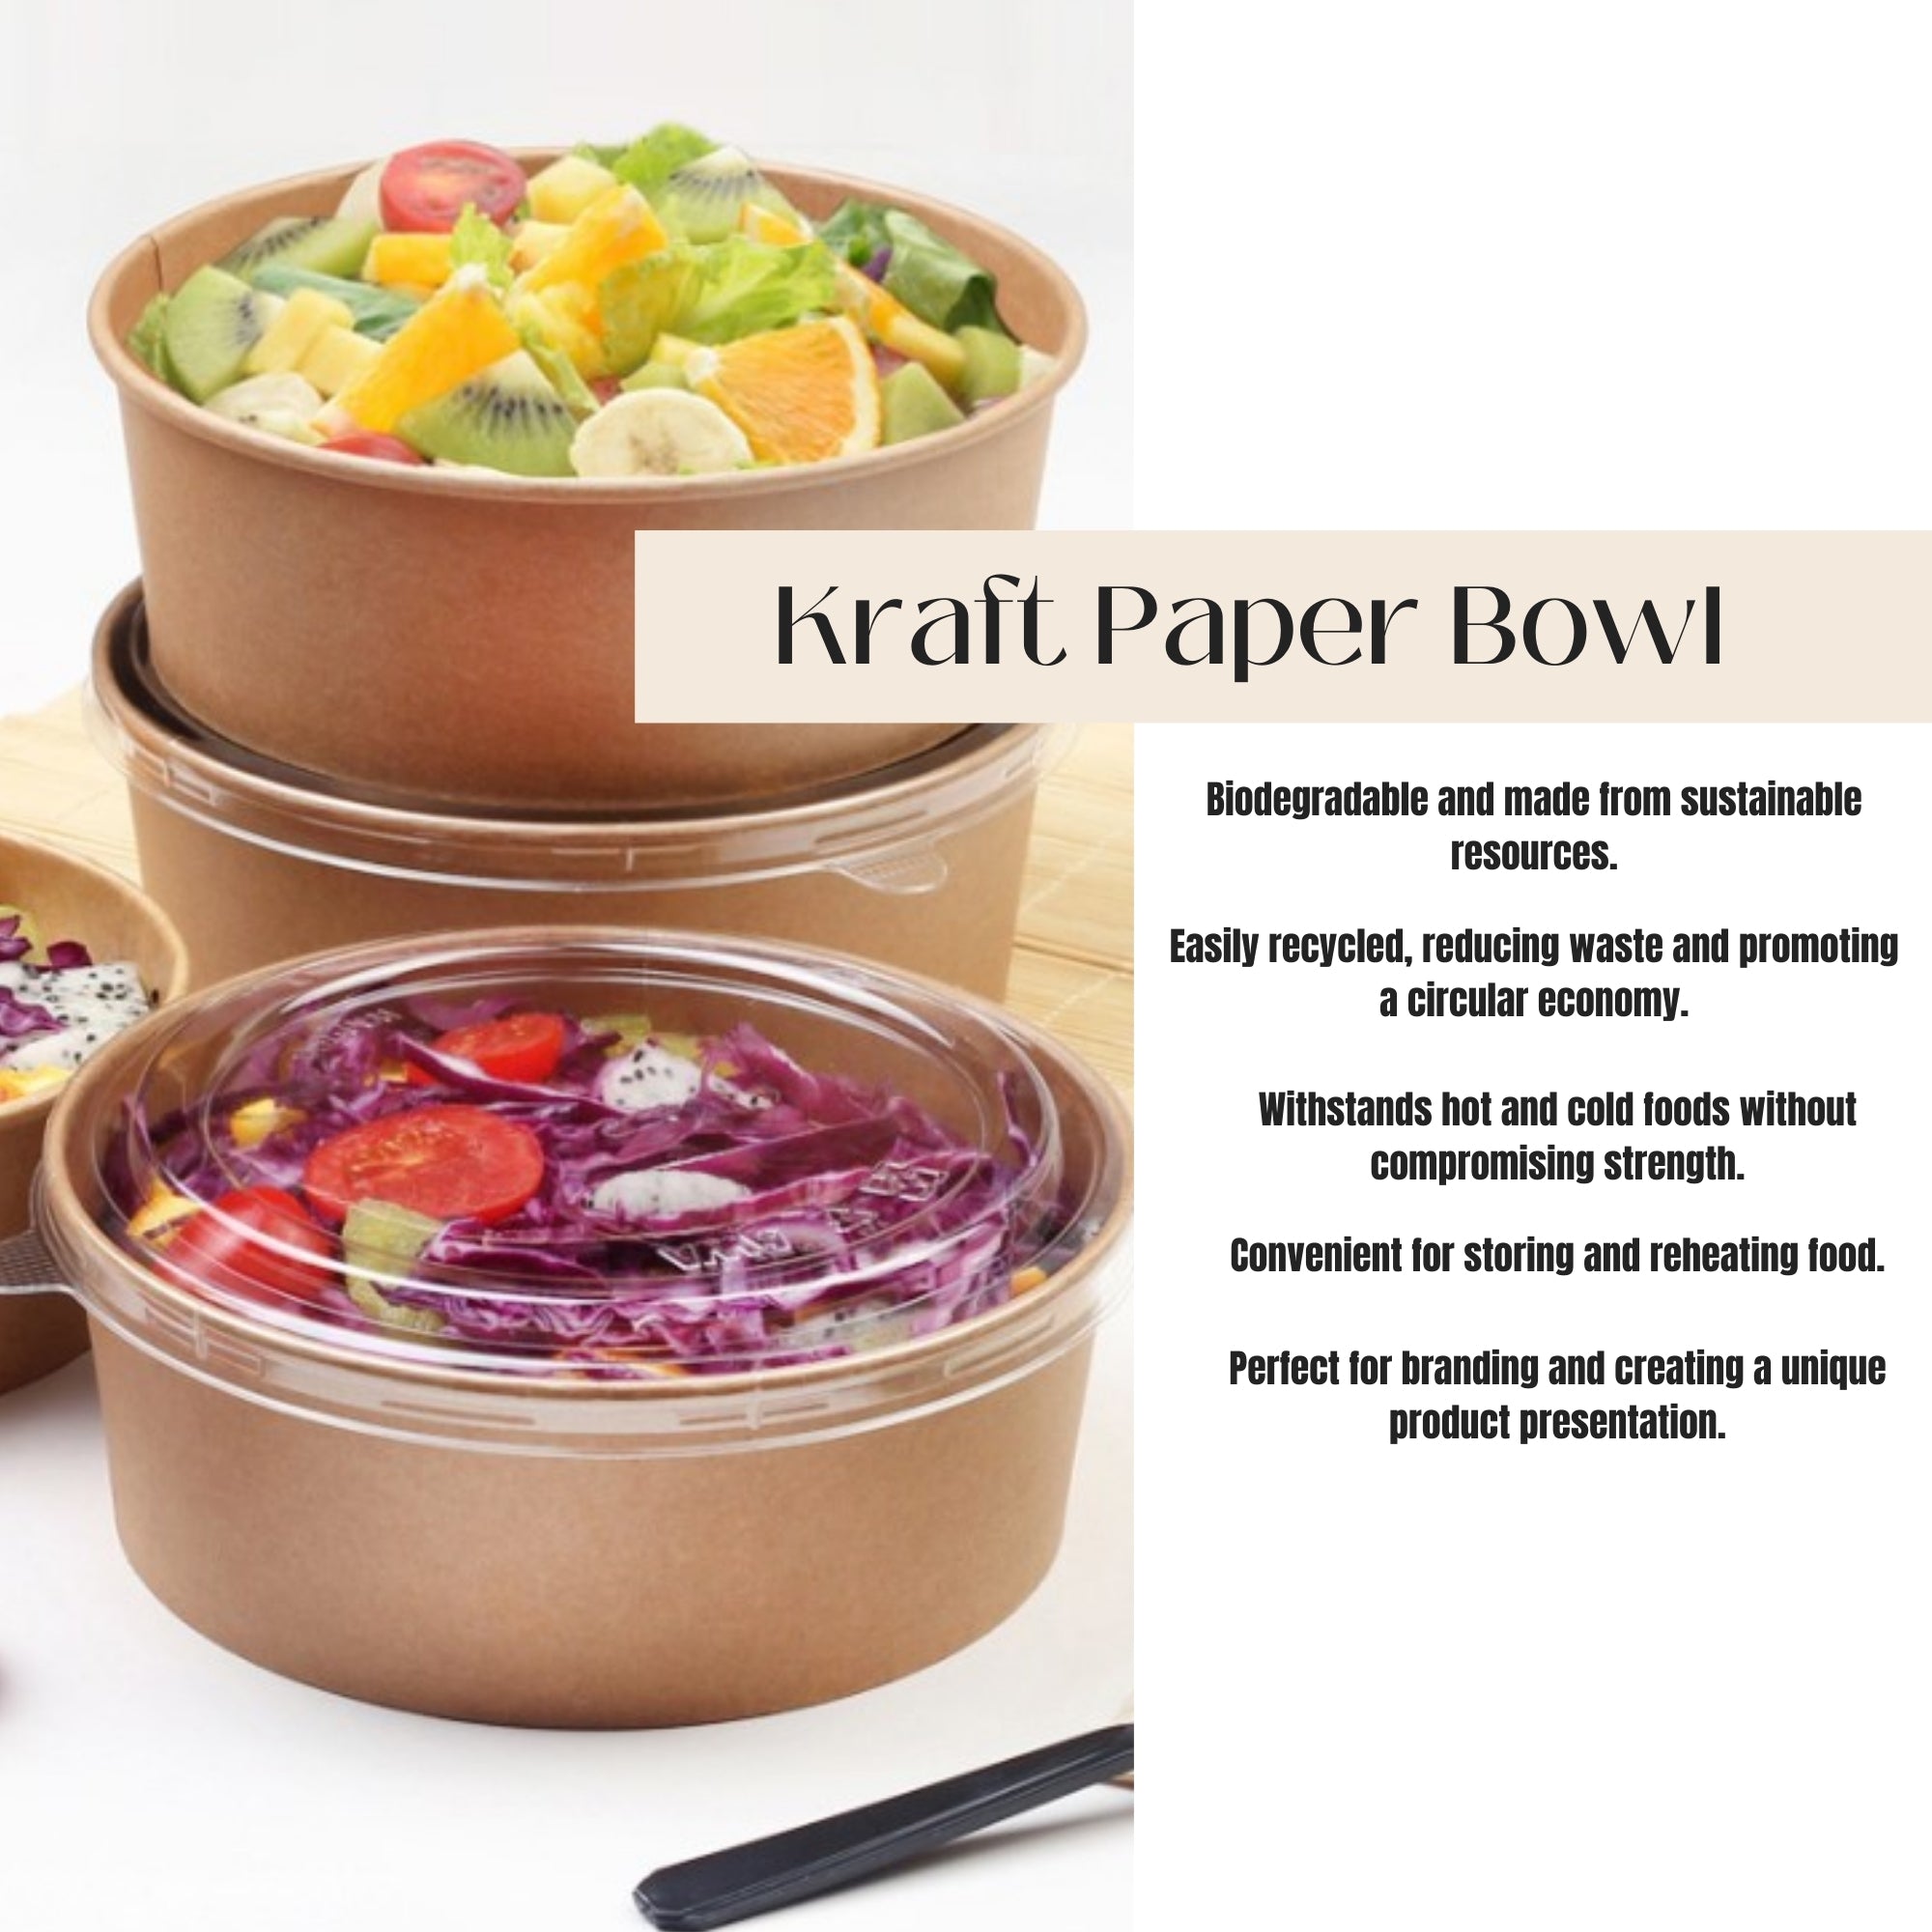 Kraft Paper Bowl, Ecosmart, sustainable, brown paper, disposable, affordable, Leak resistant, kraft paper, macaroni, salad, bulk pack, frozen treats, shops, diners, restaurants, food trucks, bakeries, Multi-Purpose, high-quality, avoid leaks, spills, pulp, durable, occasion, dinnerware, microwavable, food safe, meal prep, catering supplies, Packaging, takeout, deliveries, customized, sophistication, personalize, freshness, Compostable Fiber, renewable, biodegradable